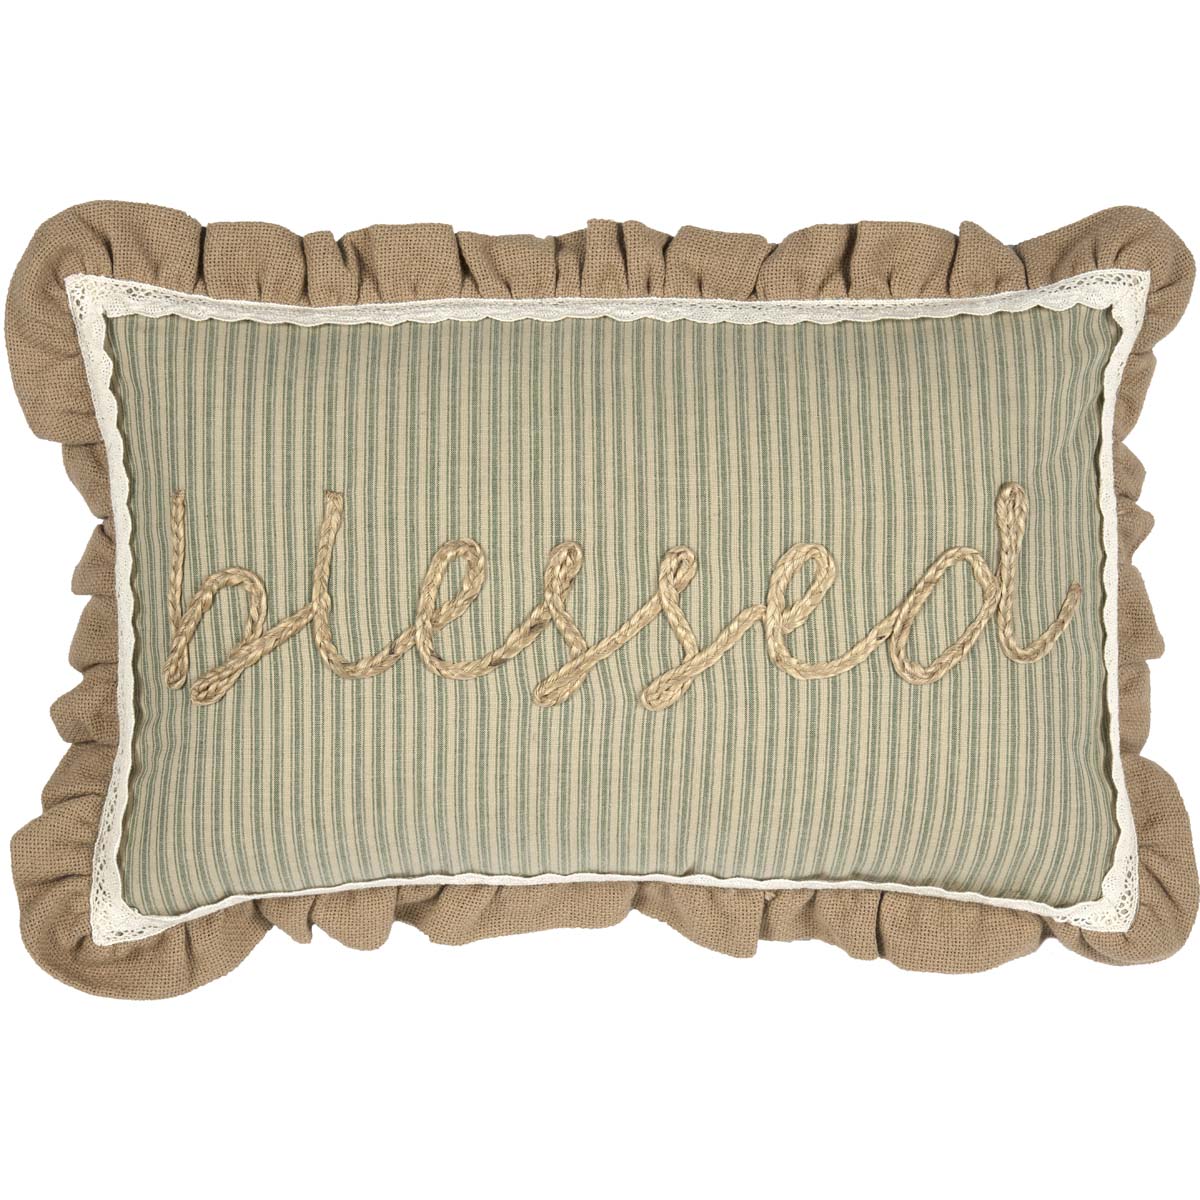 34620-Prairie-Winds-Blessed-Pillow-14x22-image-4